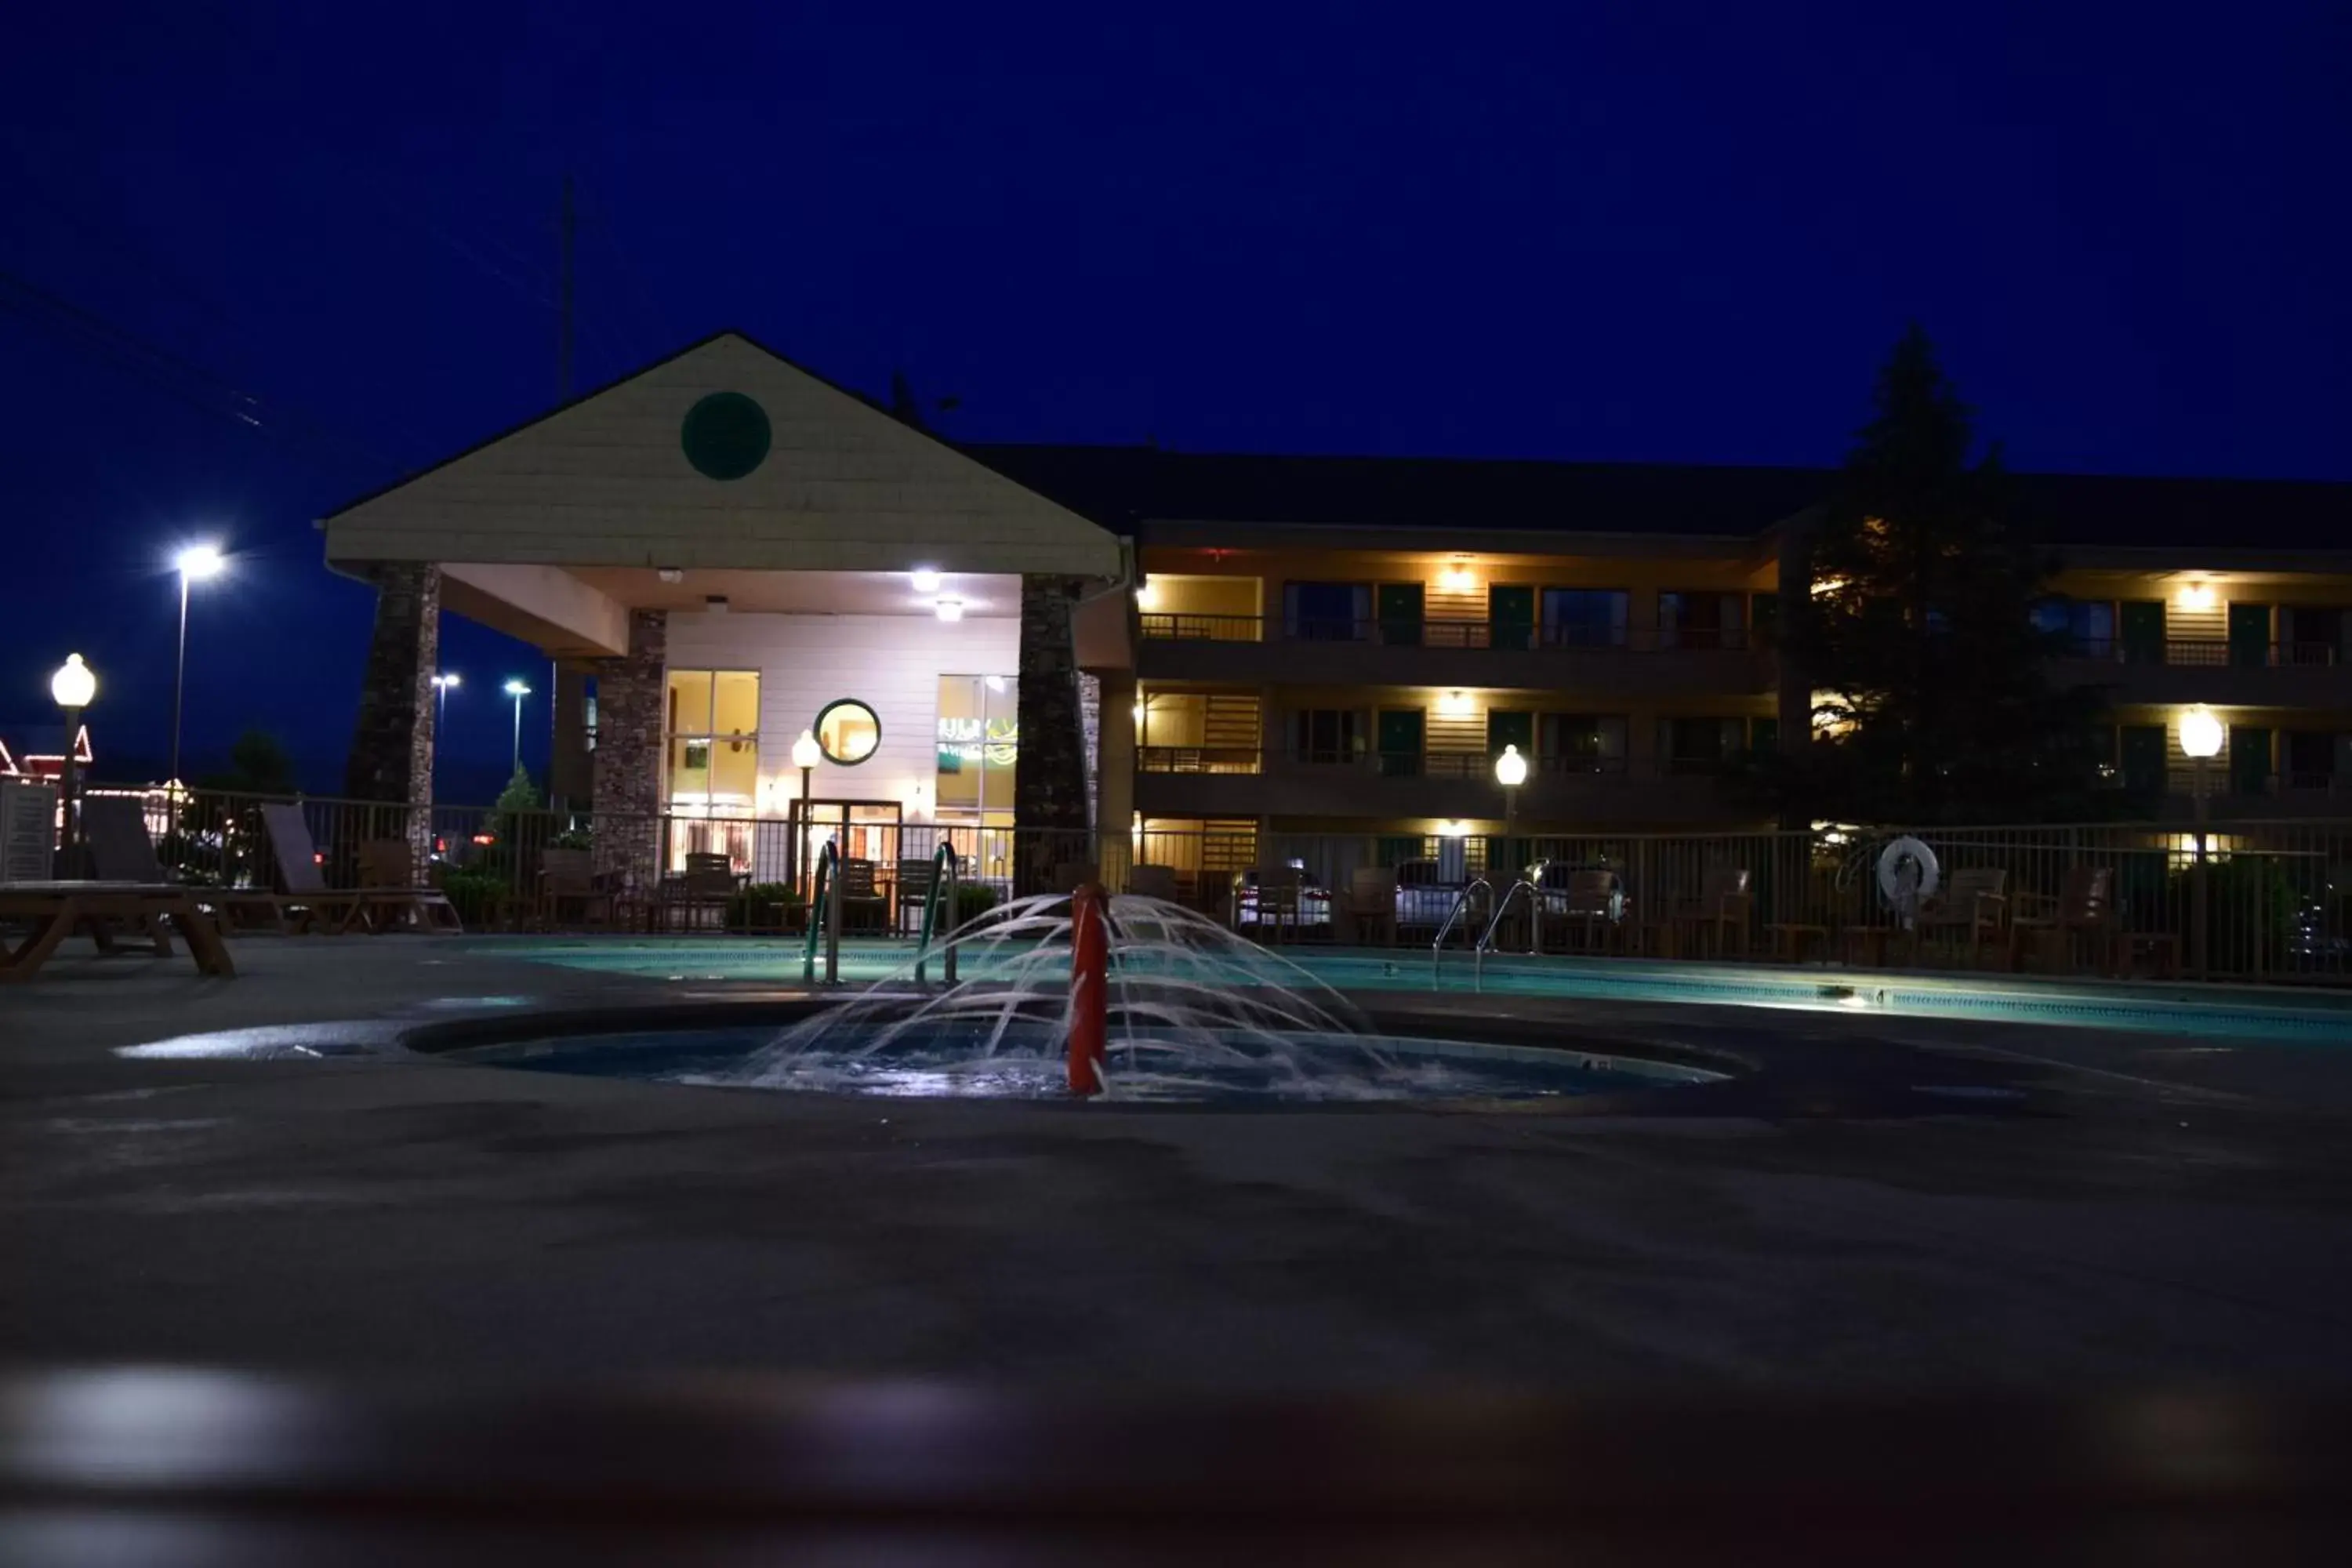 Swimming pool, Property Building in Quality Inn & Suites at Dollywood Lane